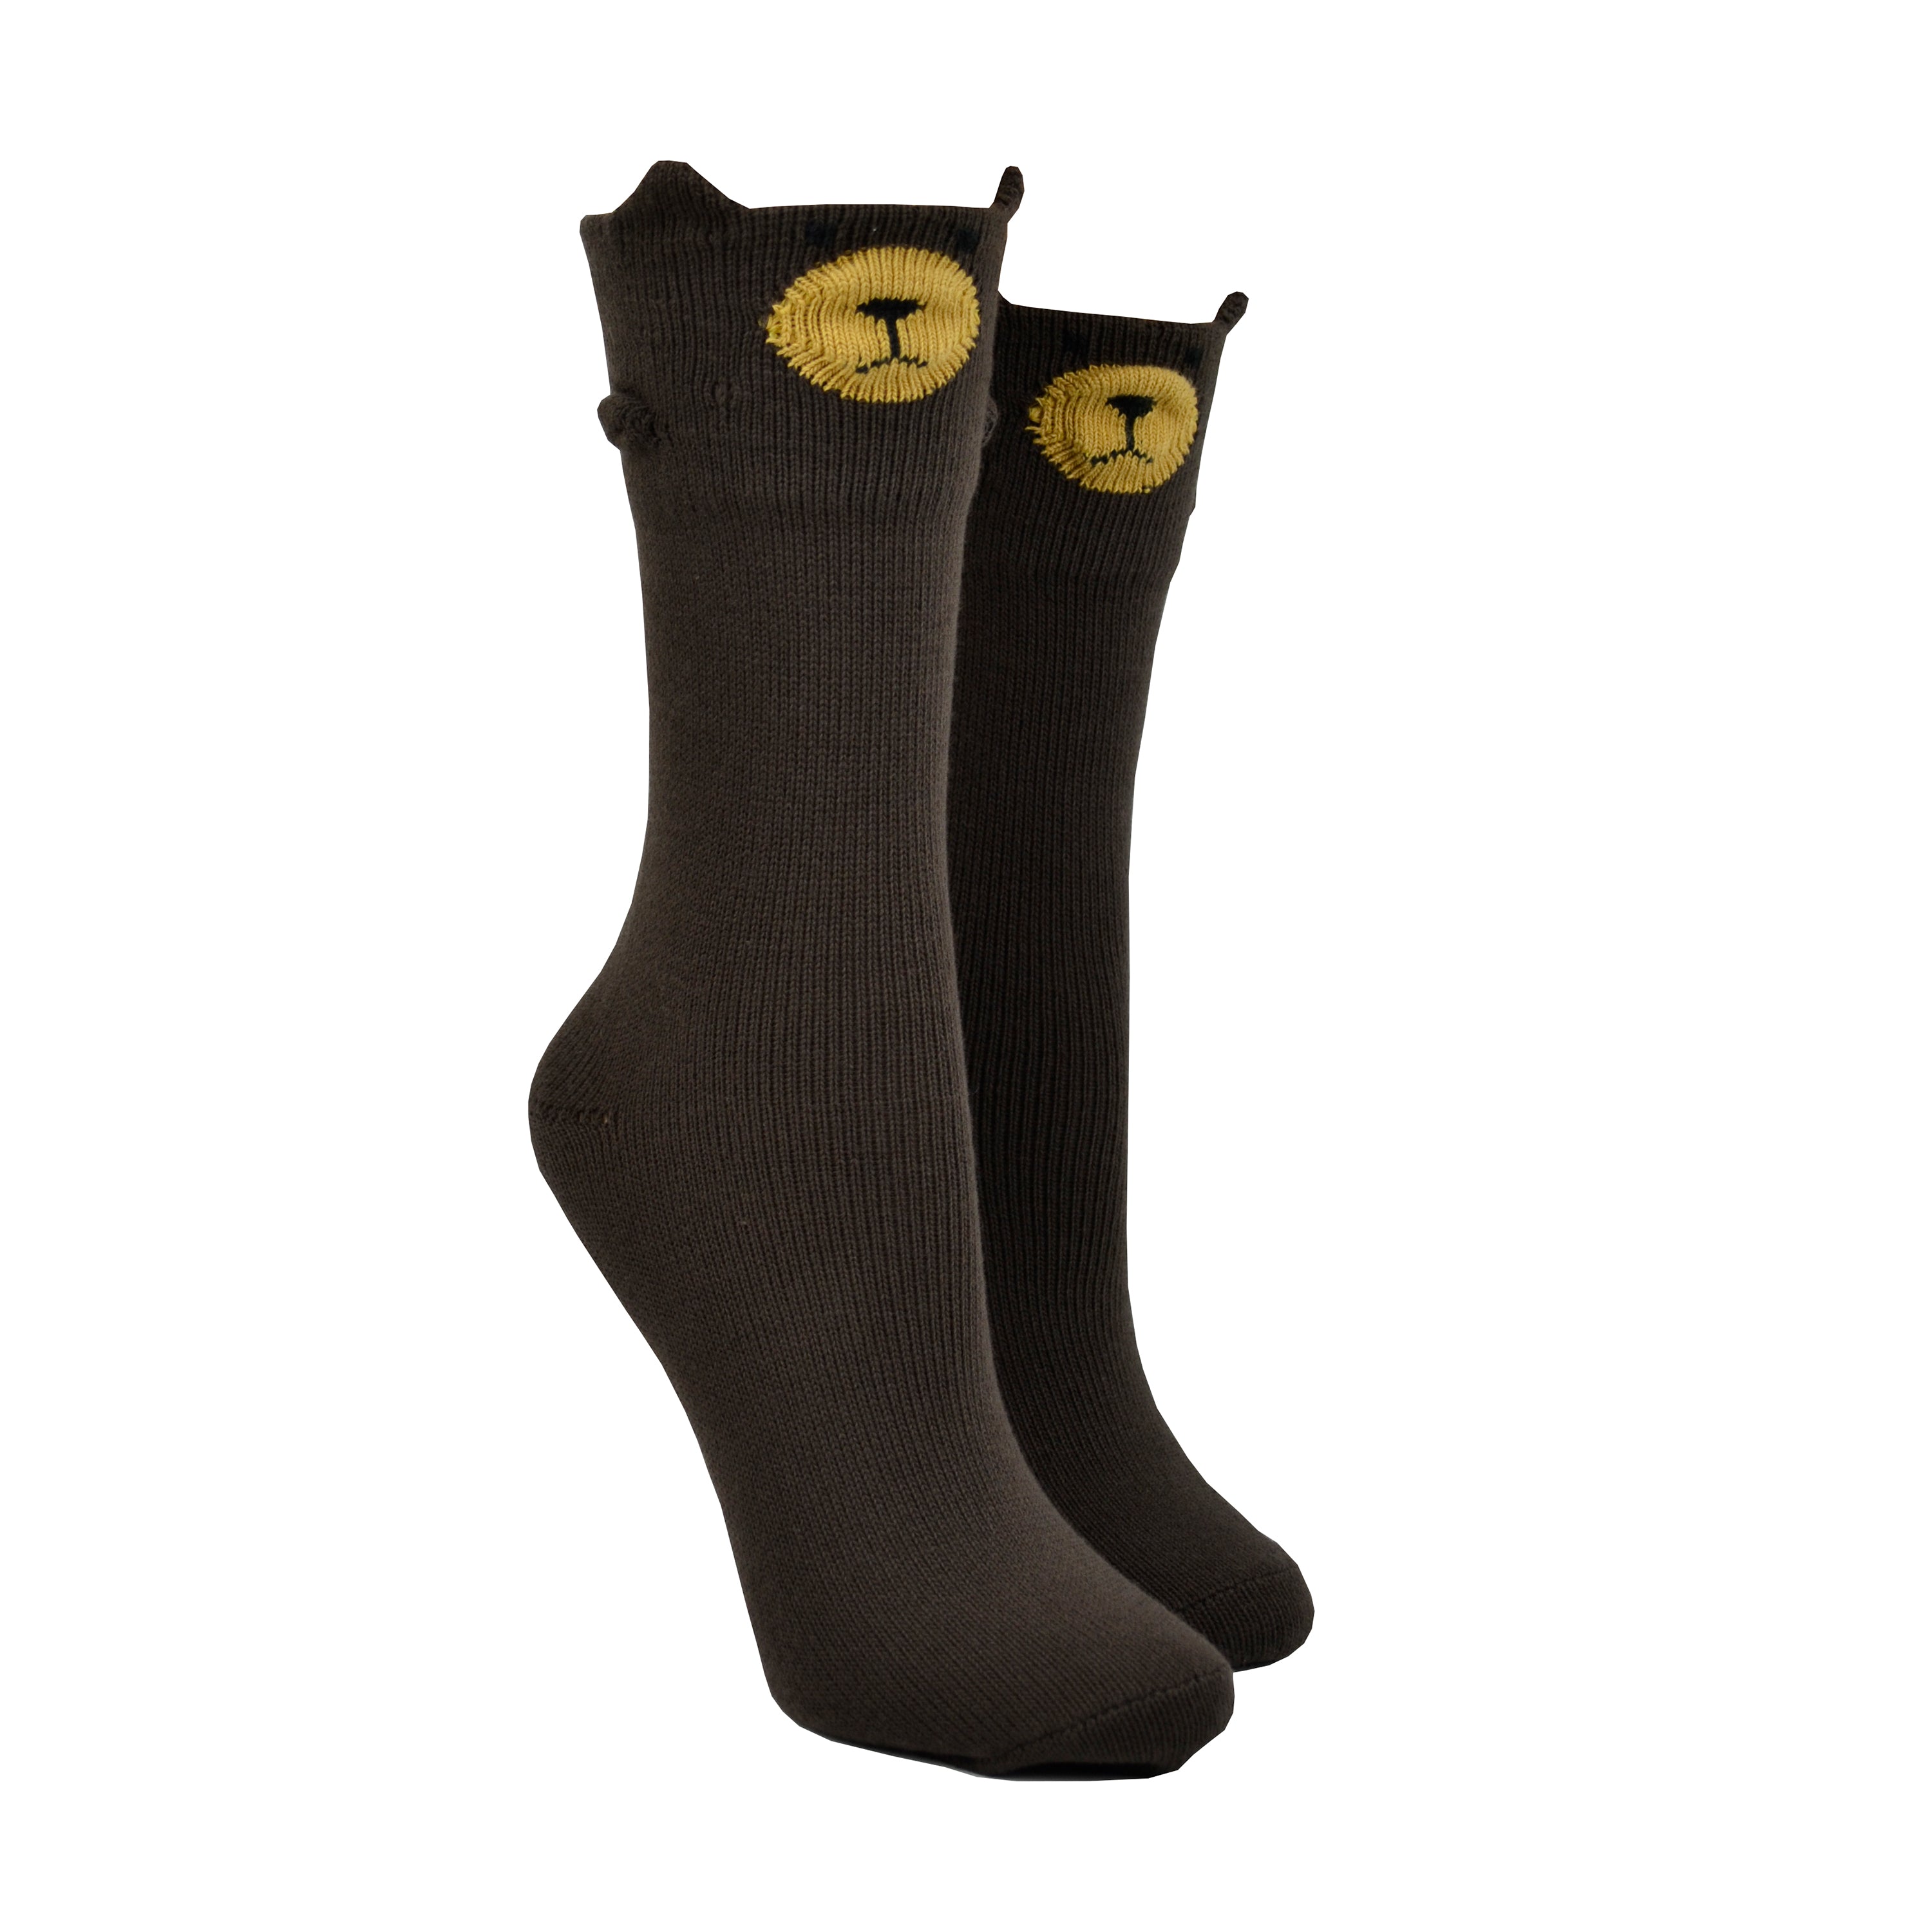 Shown on a foot mold, a pair of Foot Traffic, brown cotton women's crew socks with three dimensional pattern of cute bear